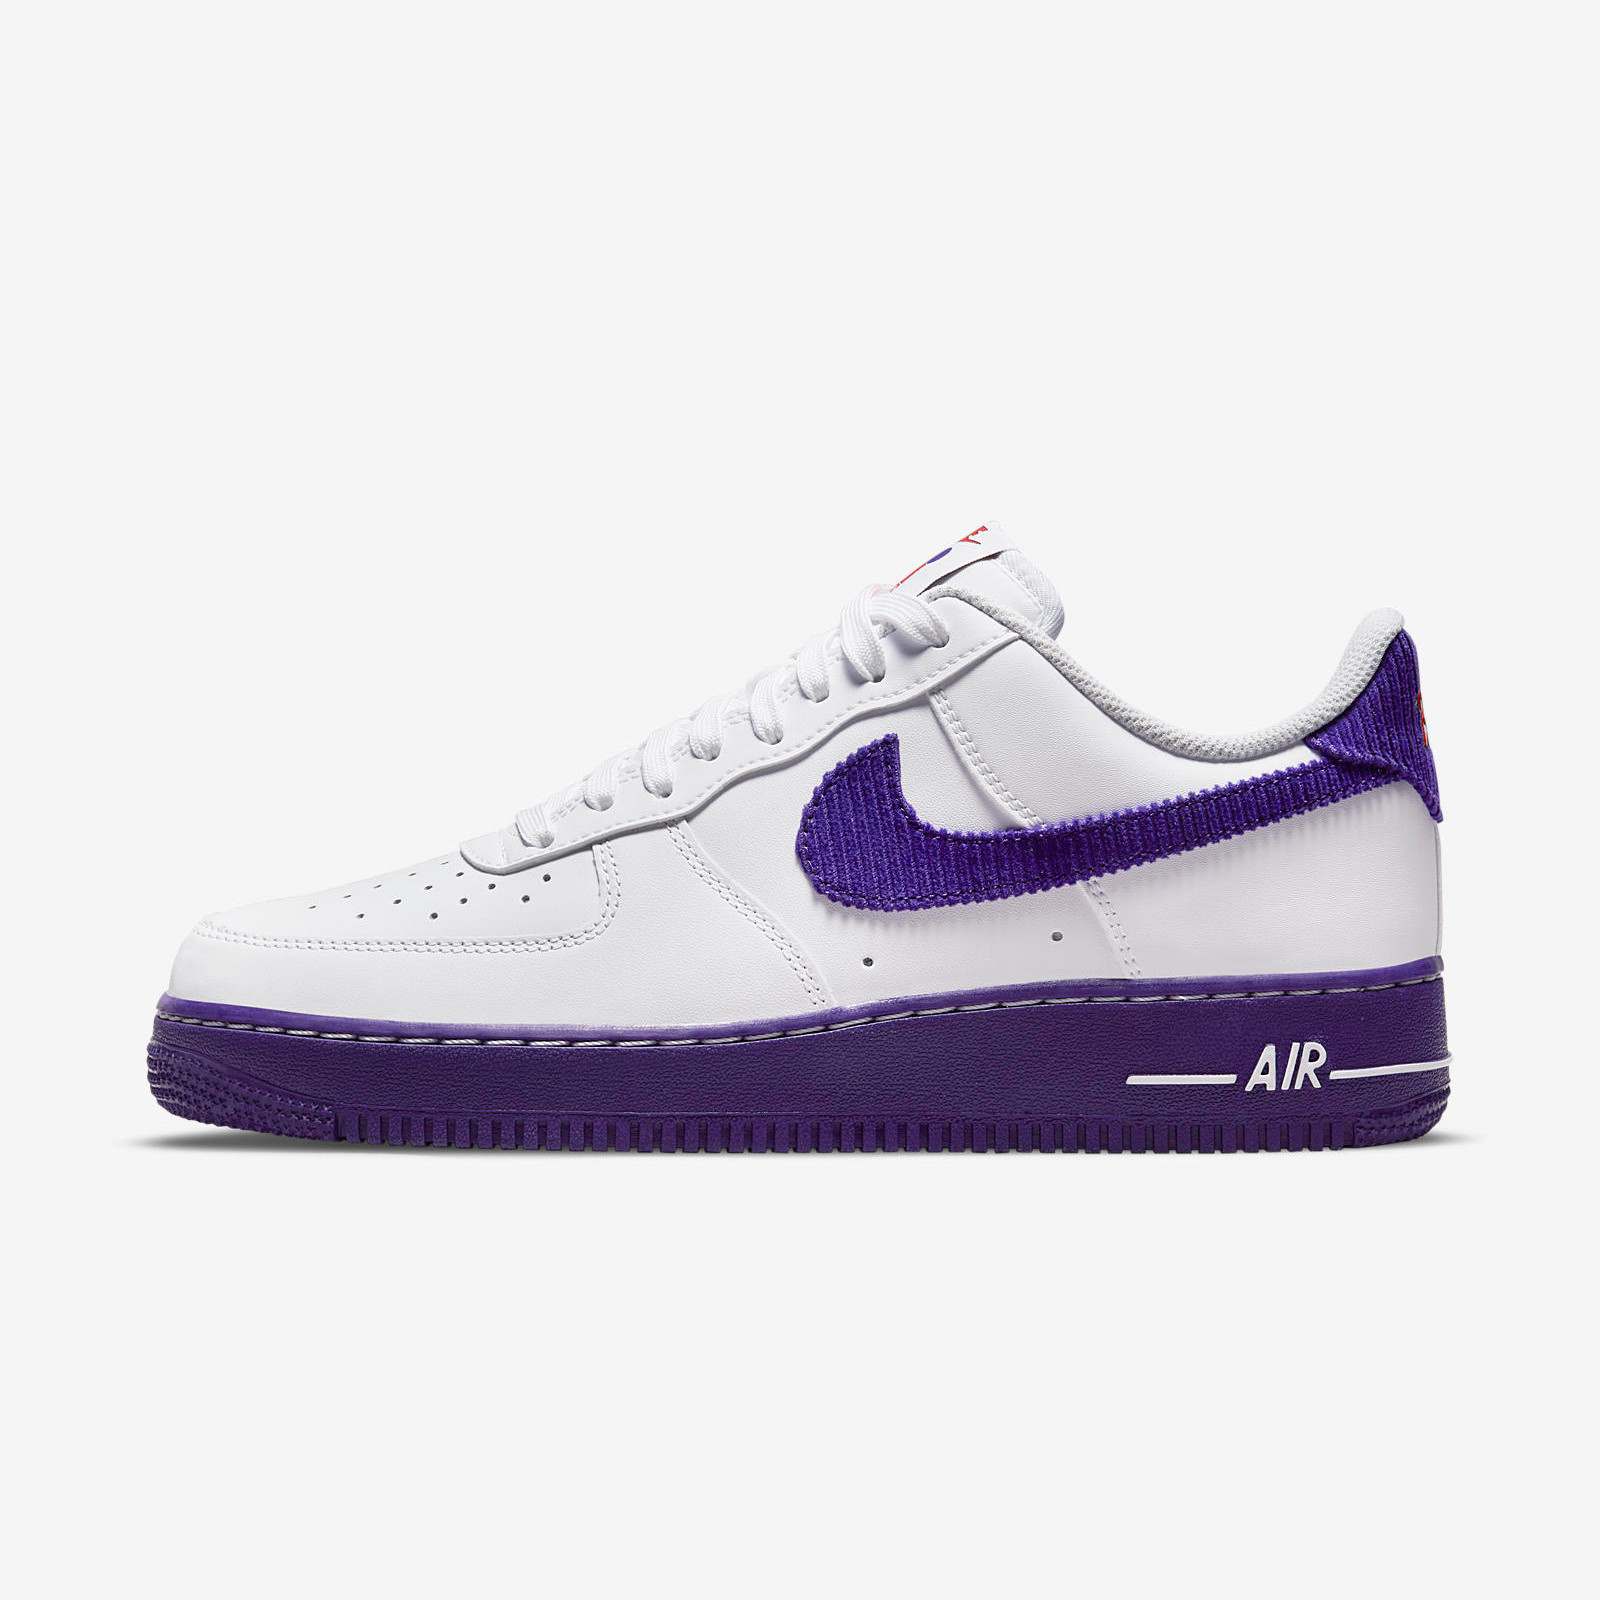 Nike Air Force 1 Low
« Sports Specialties »